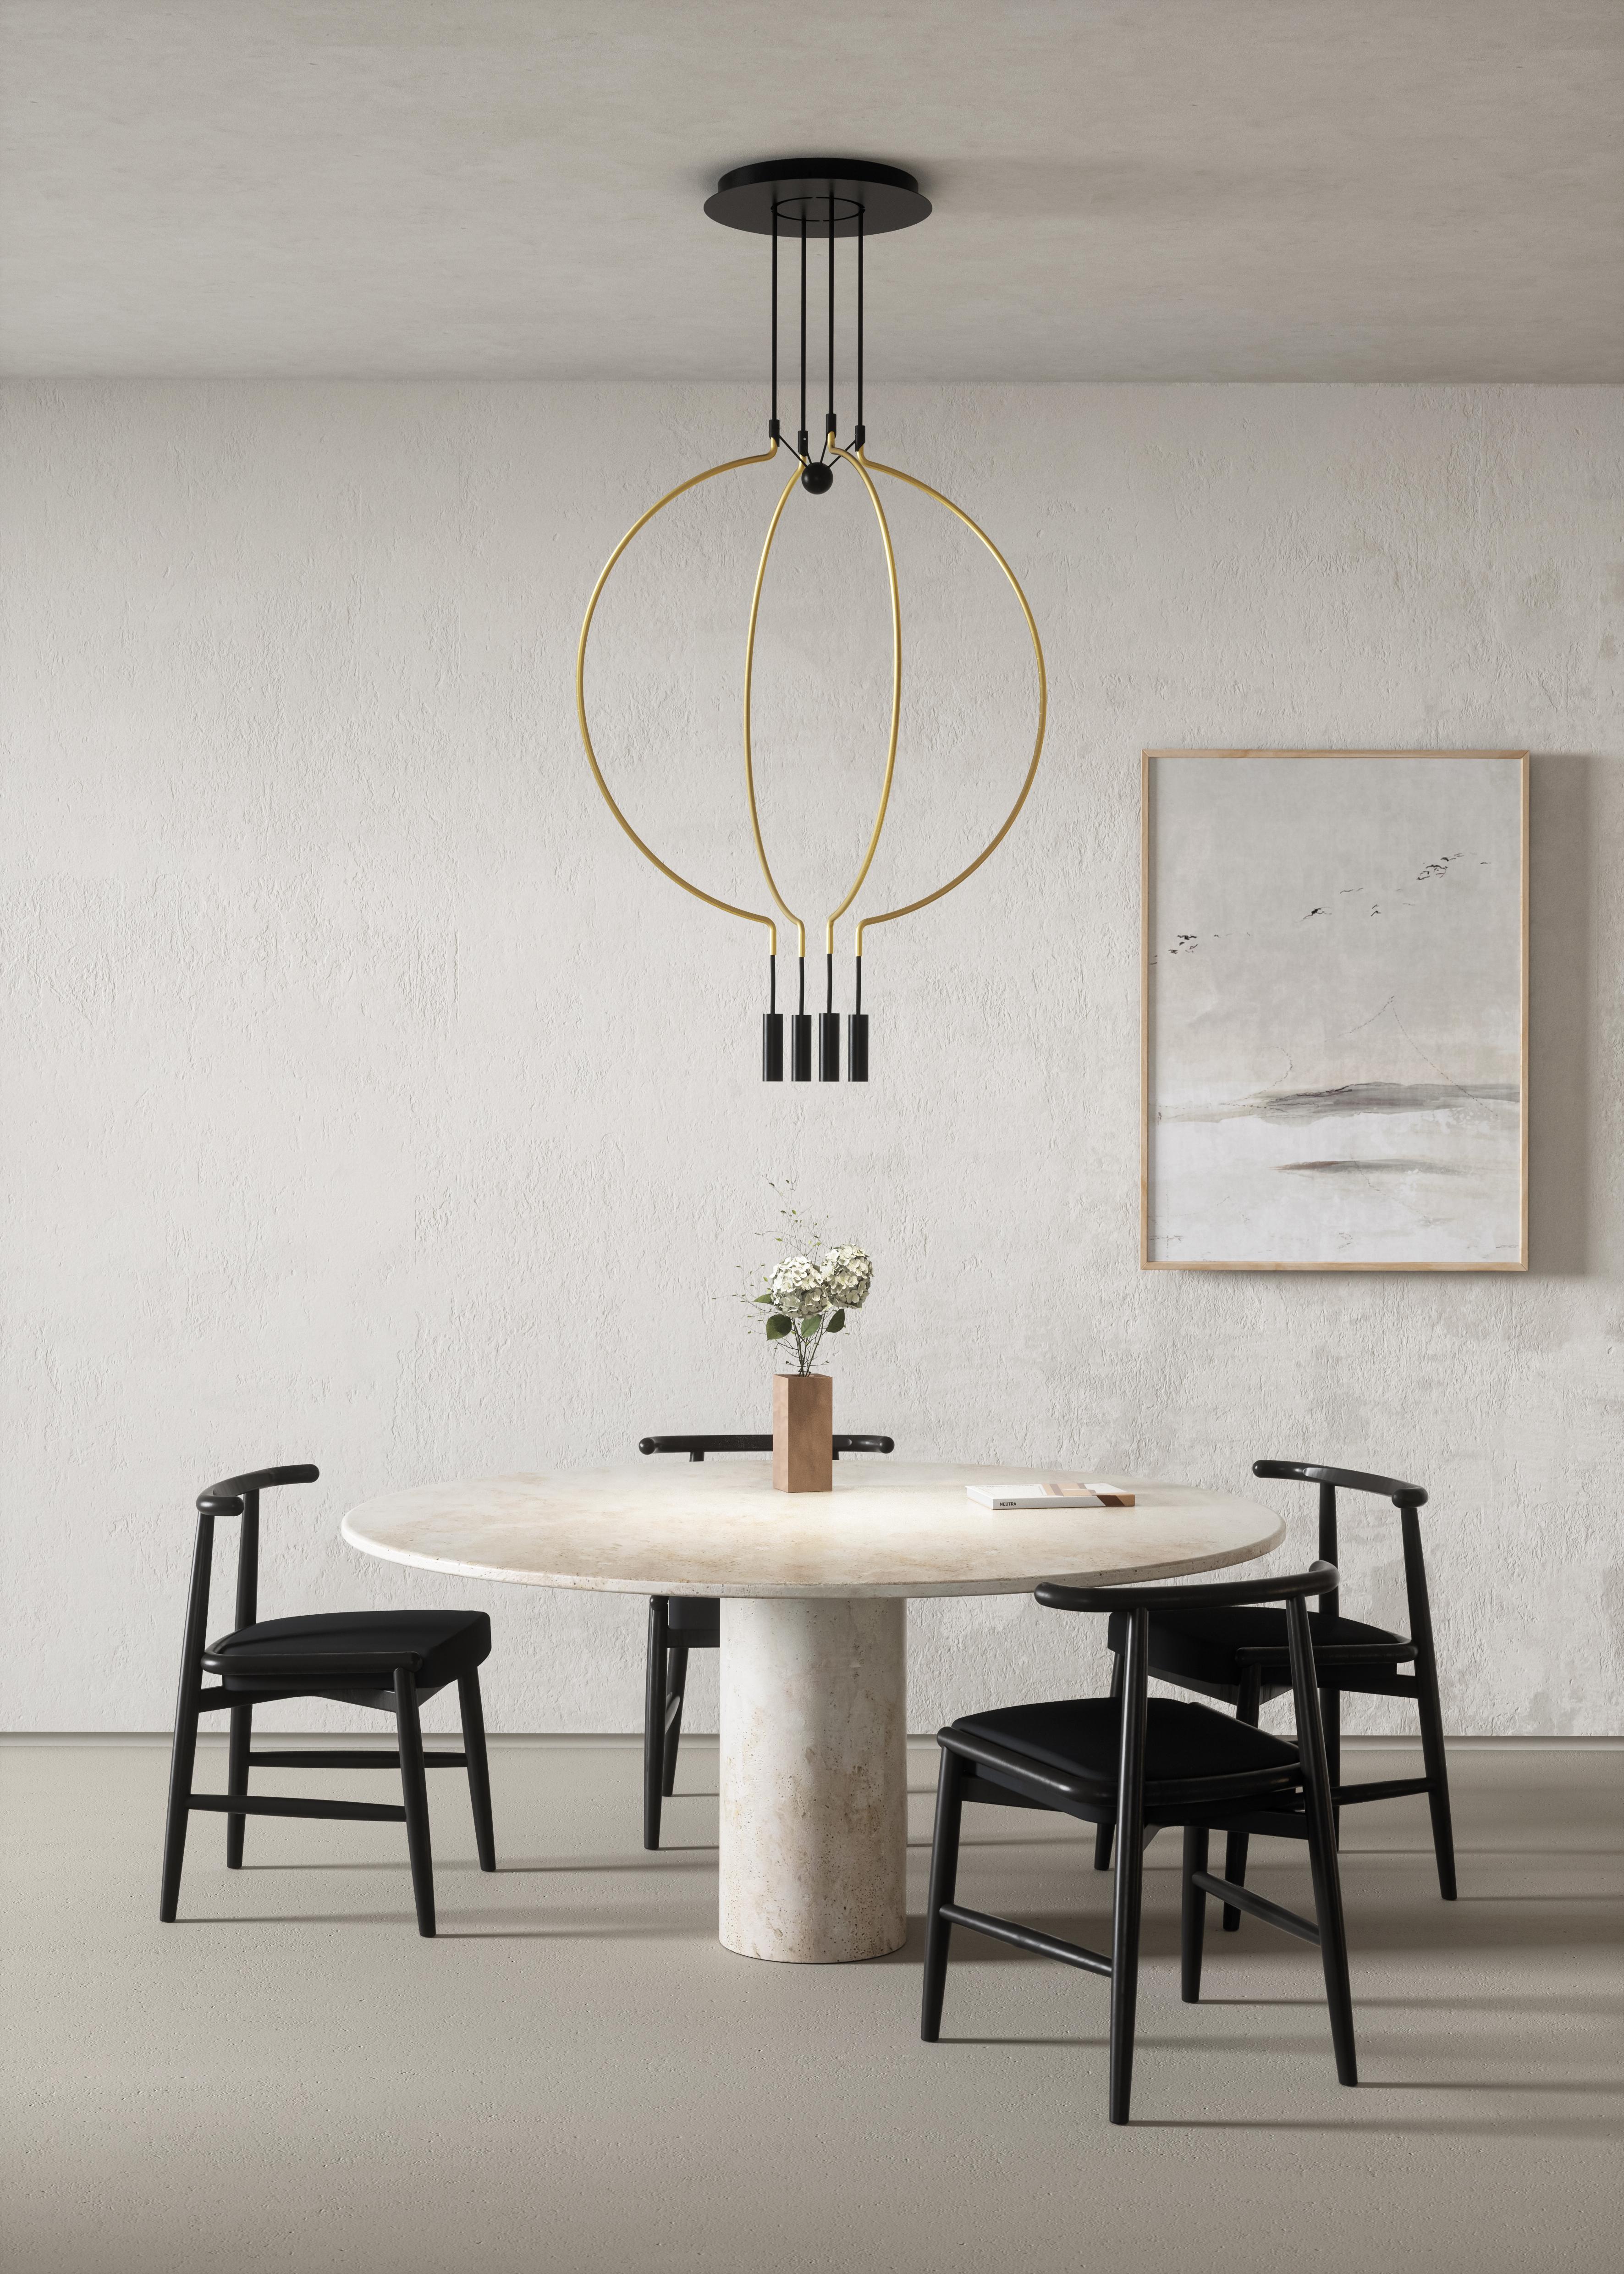 Axolight Liaison Model G8 Pendant Lamp in Gold/Black by Sara Moroni

Modular lightness and elegance. Liaison tells about the perfect balance of three geometric archetypes: sphere, circle and cylinder compose a system that includes the single pendant